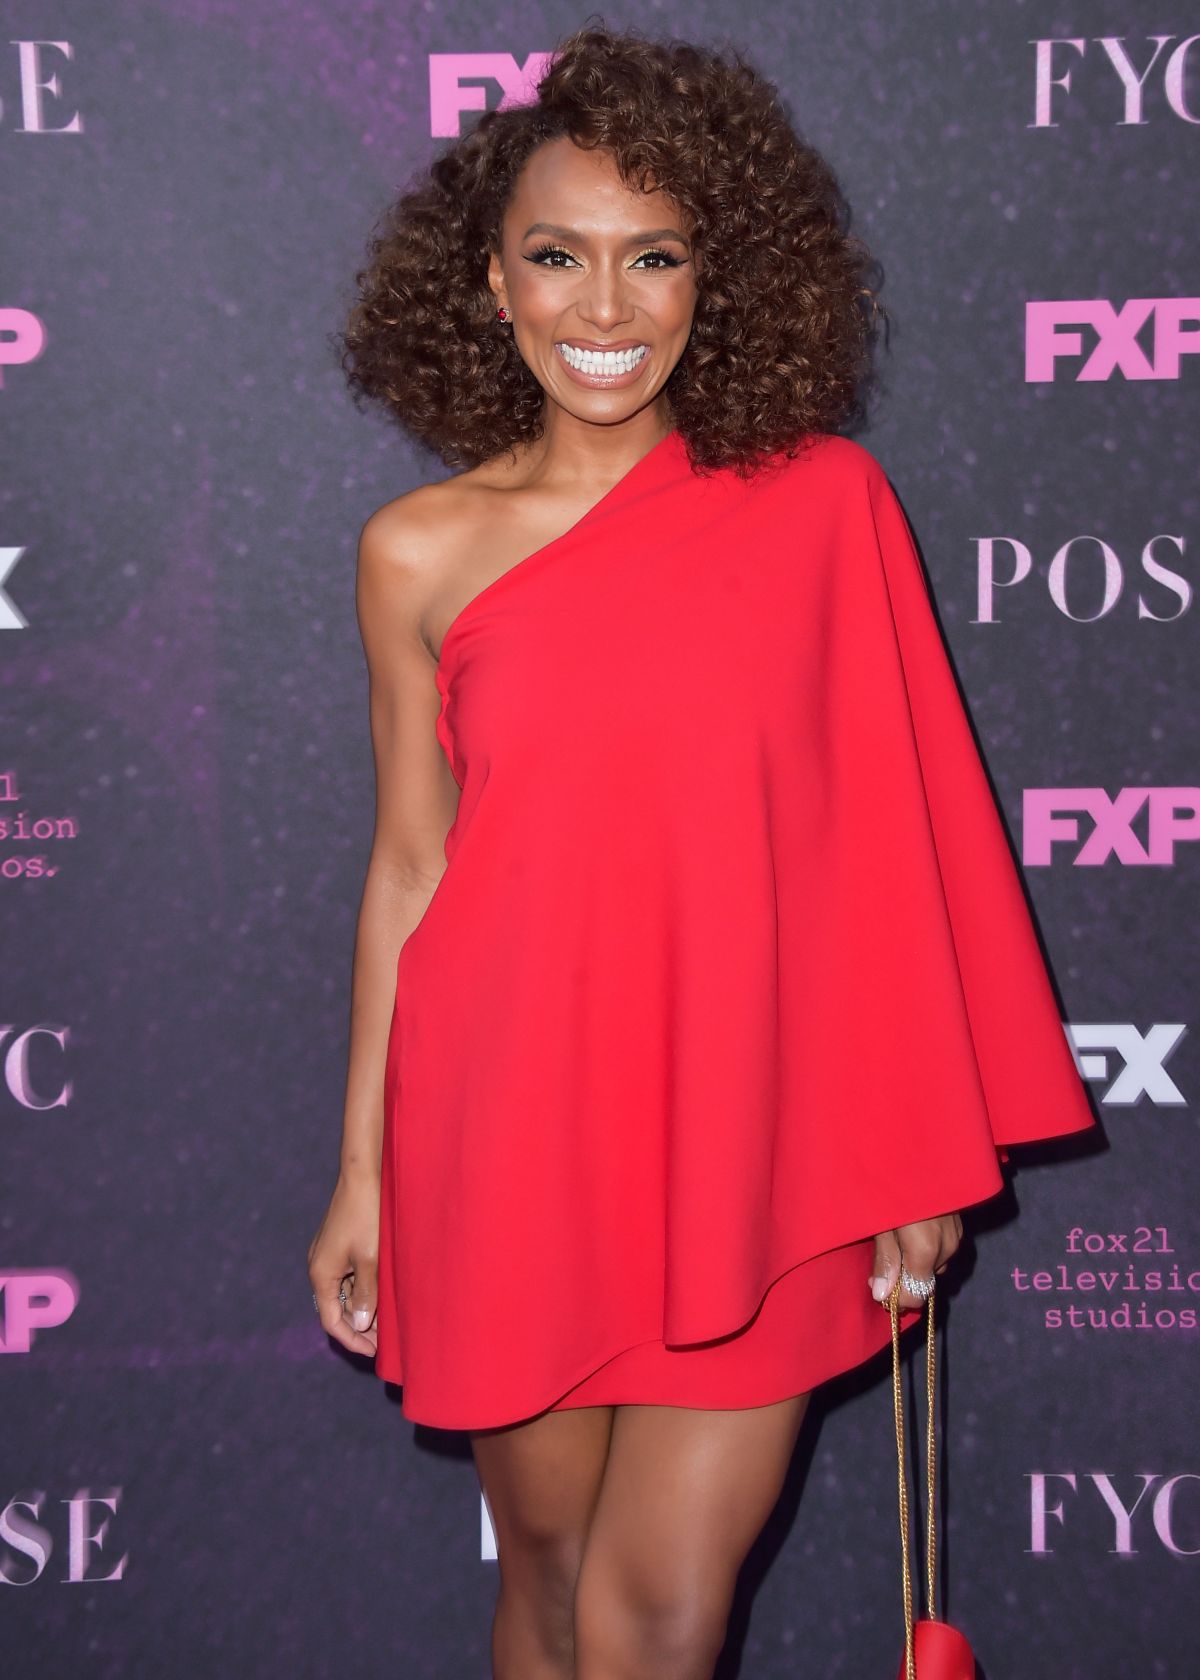 Download JANET MOCK at Pose Premiere in Los Angeles 08/09/2019 ...